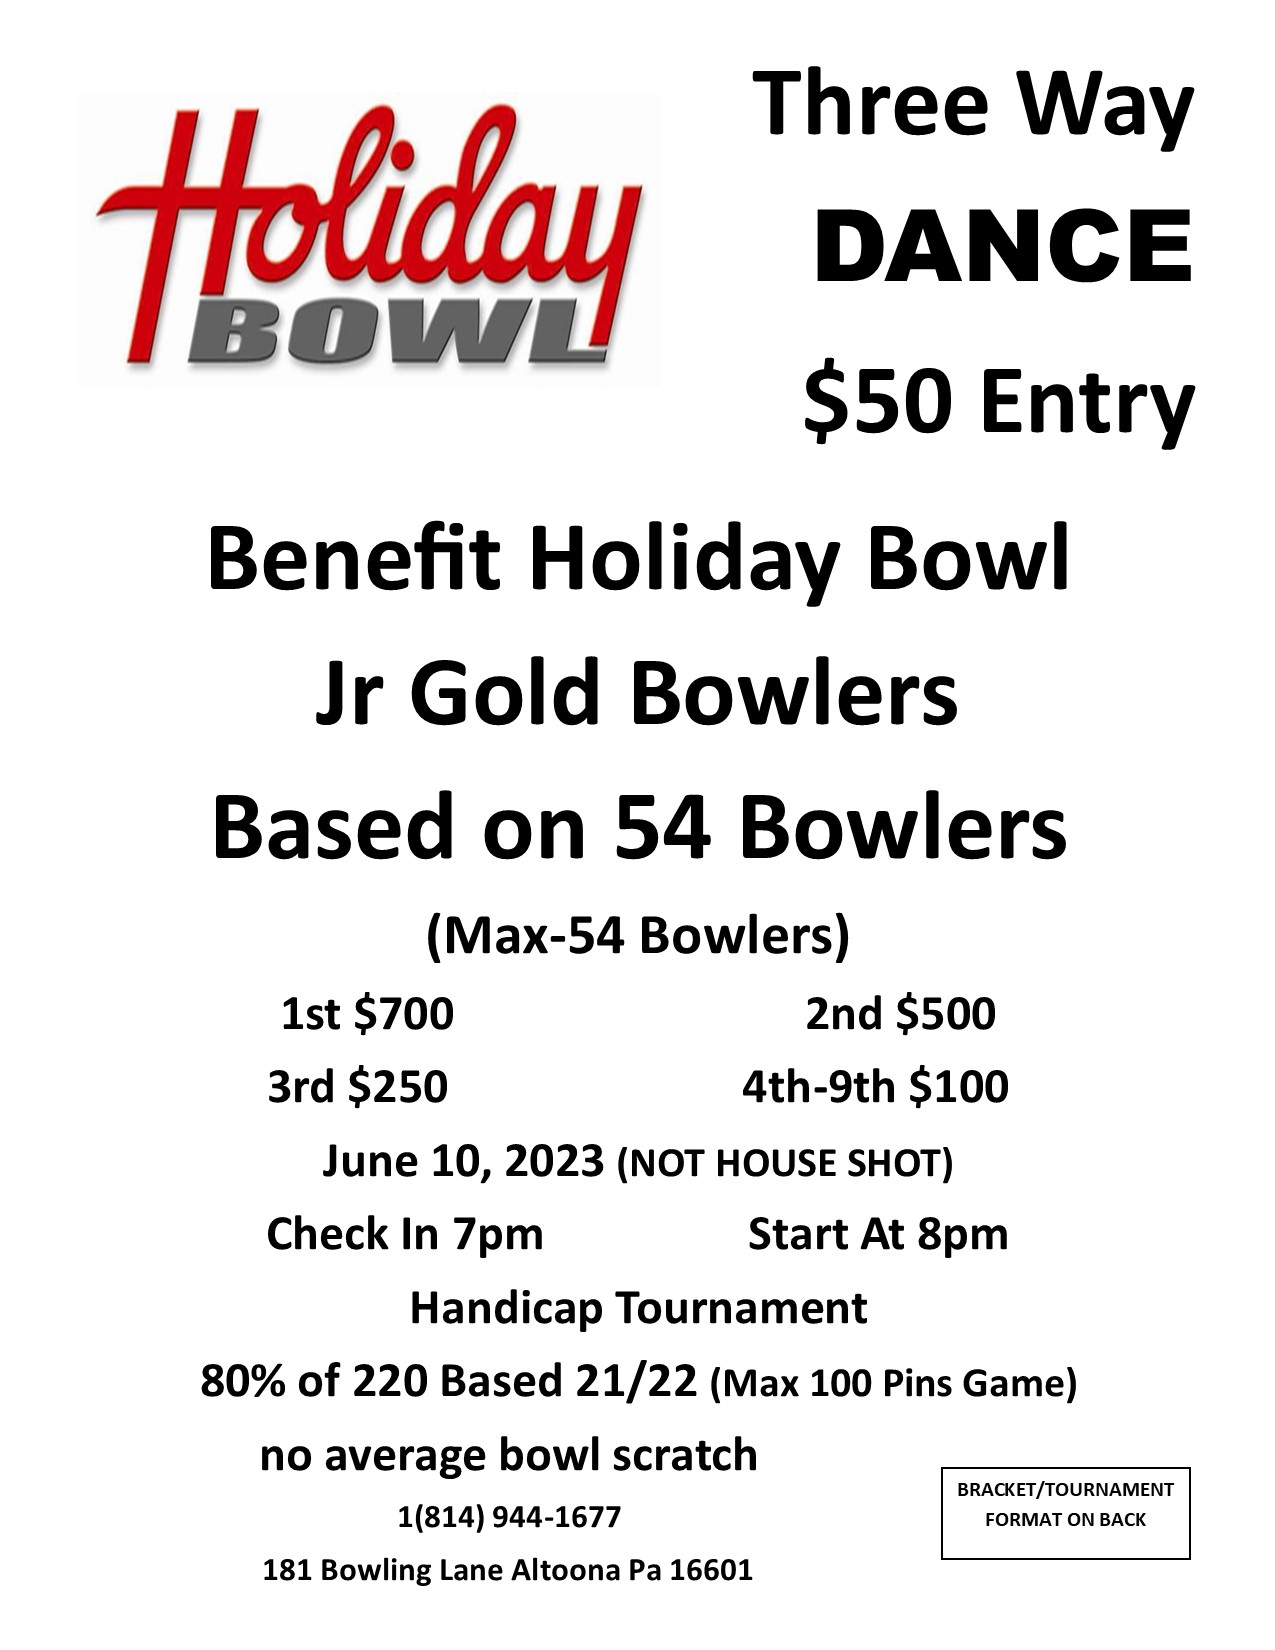 Holiday Bowl Altoona - Three Way DANCE $50 Entry Benefit Holiday Bowl Jr Gold Bowlers Based on 54 Bowlers